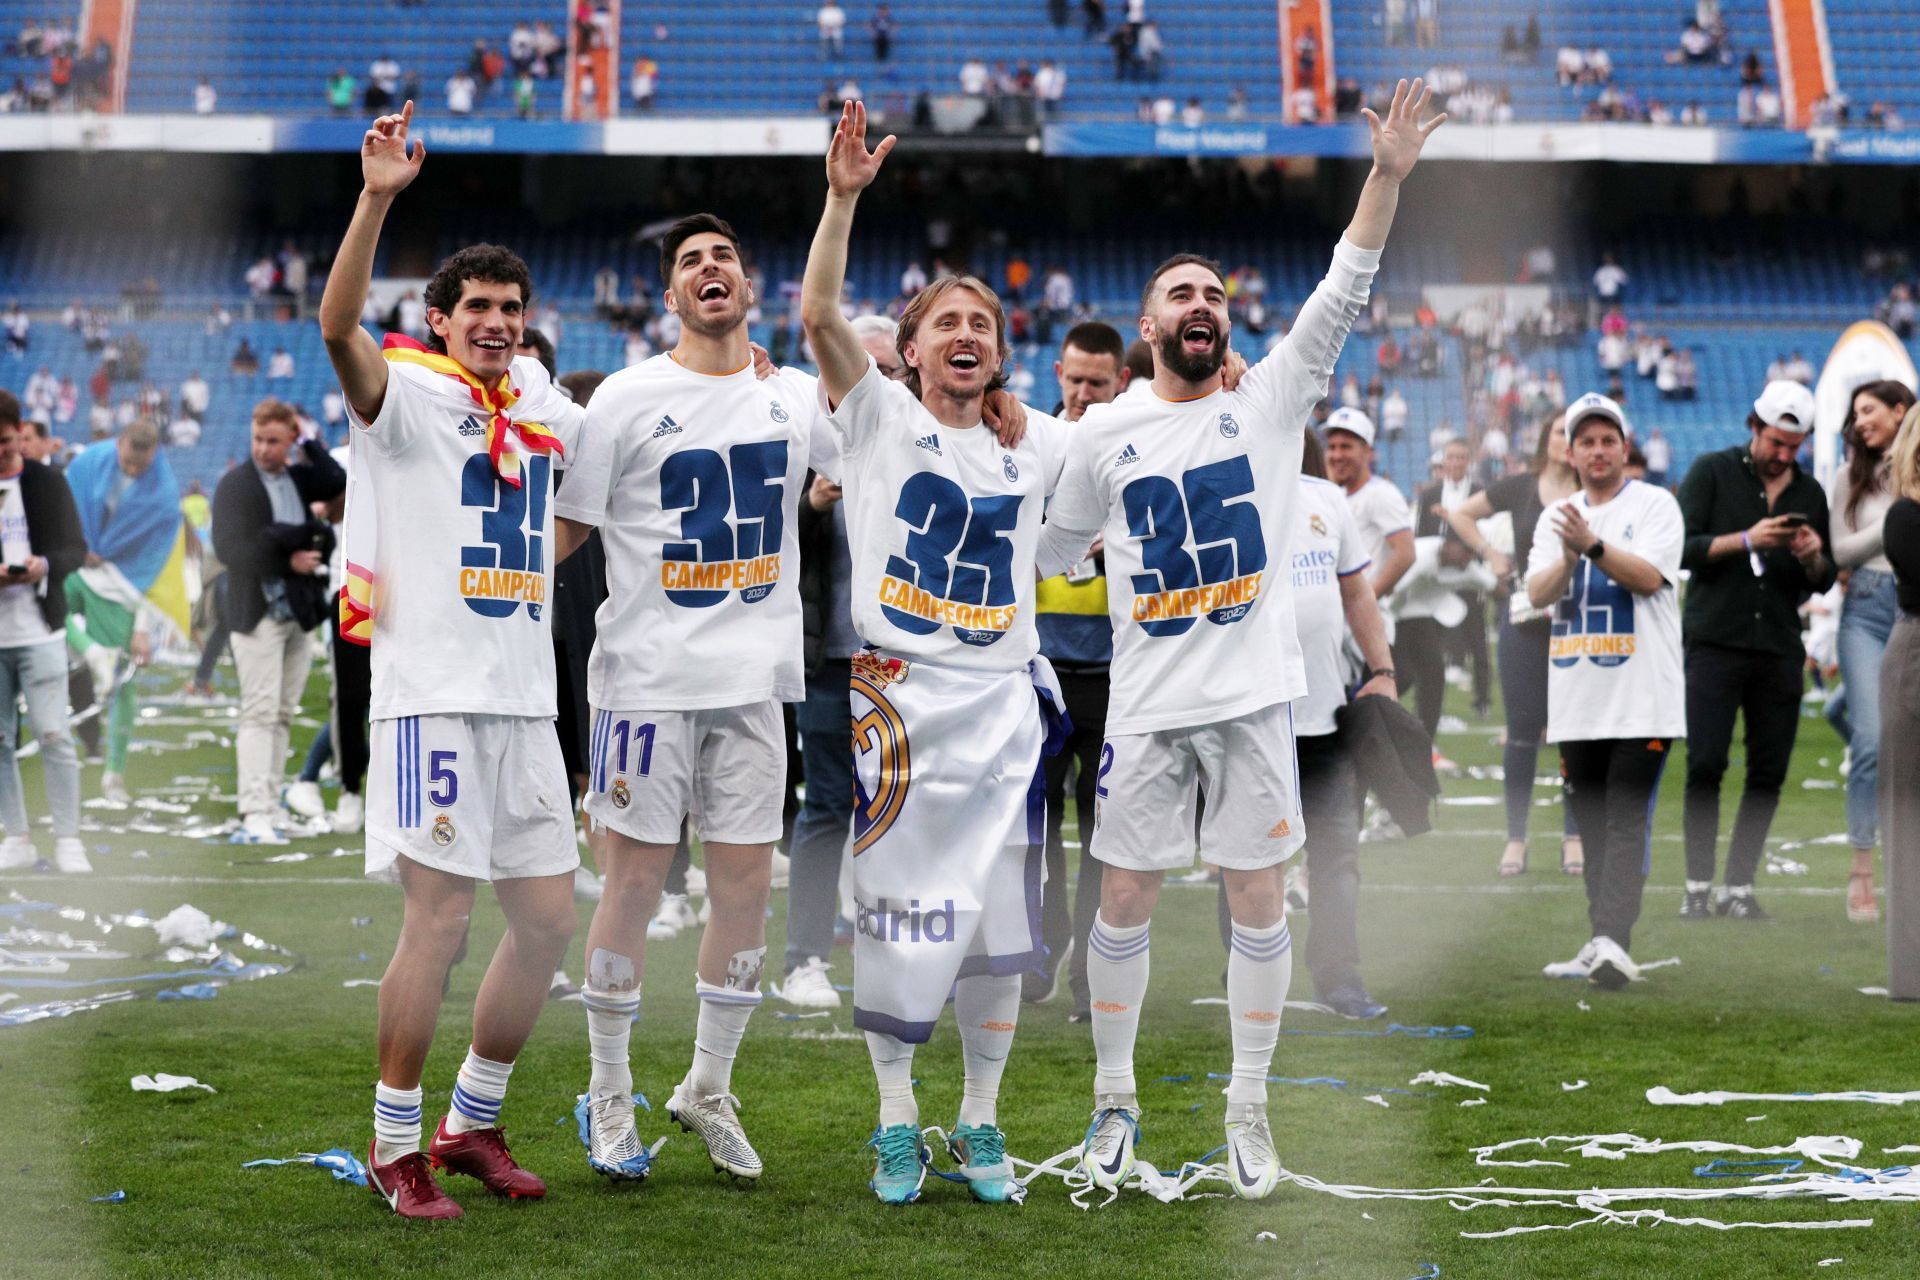 Real Madrid CF players celebrate after winning the league.